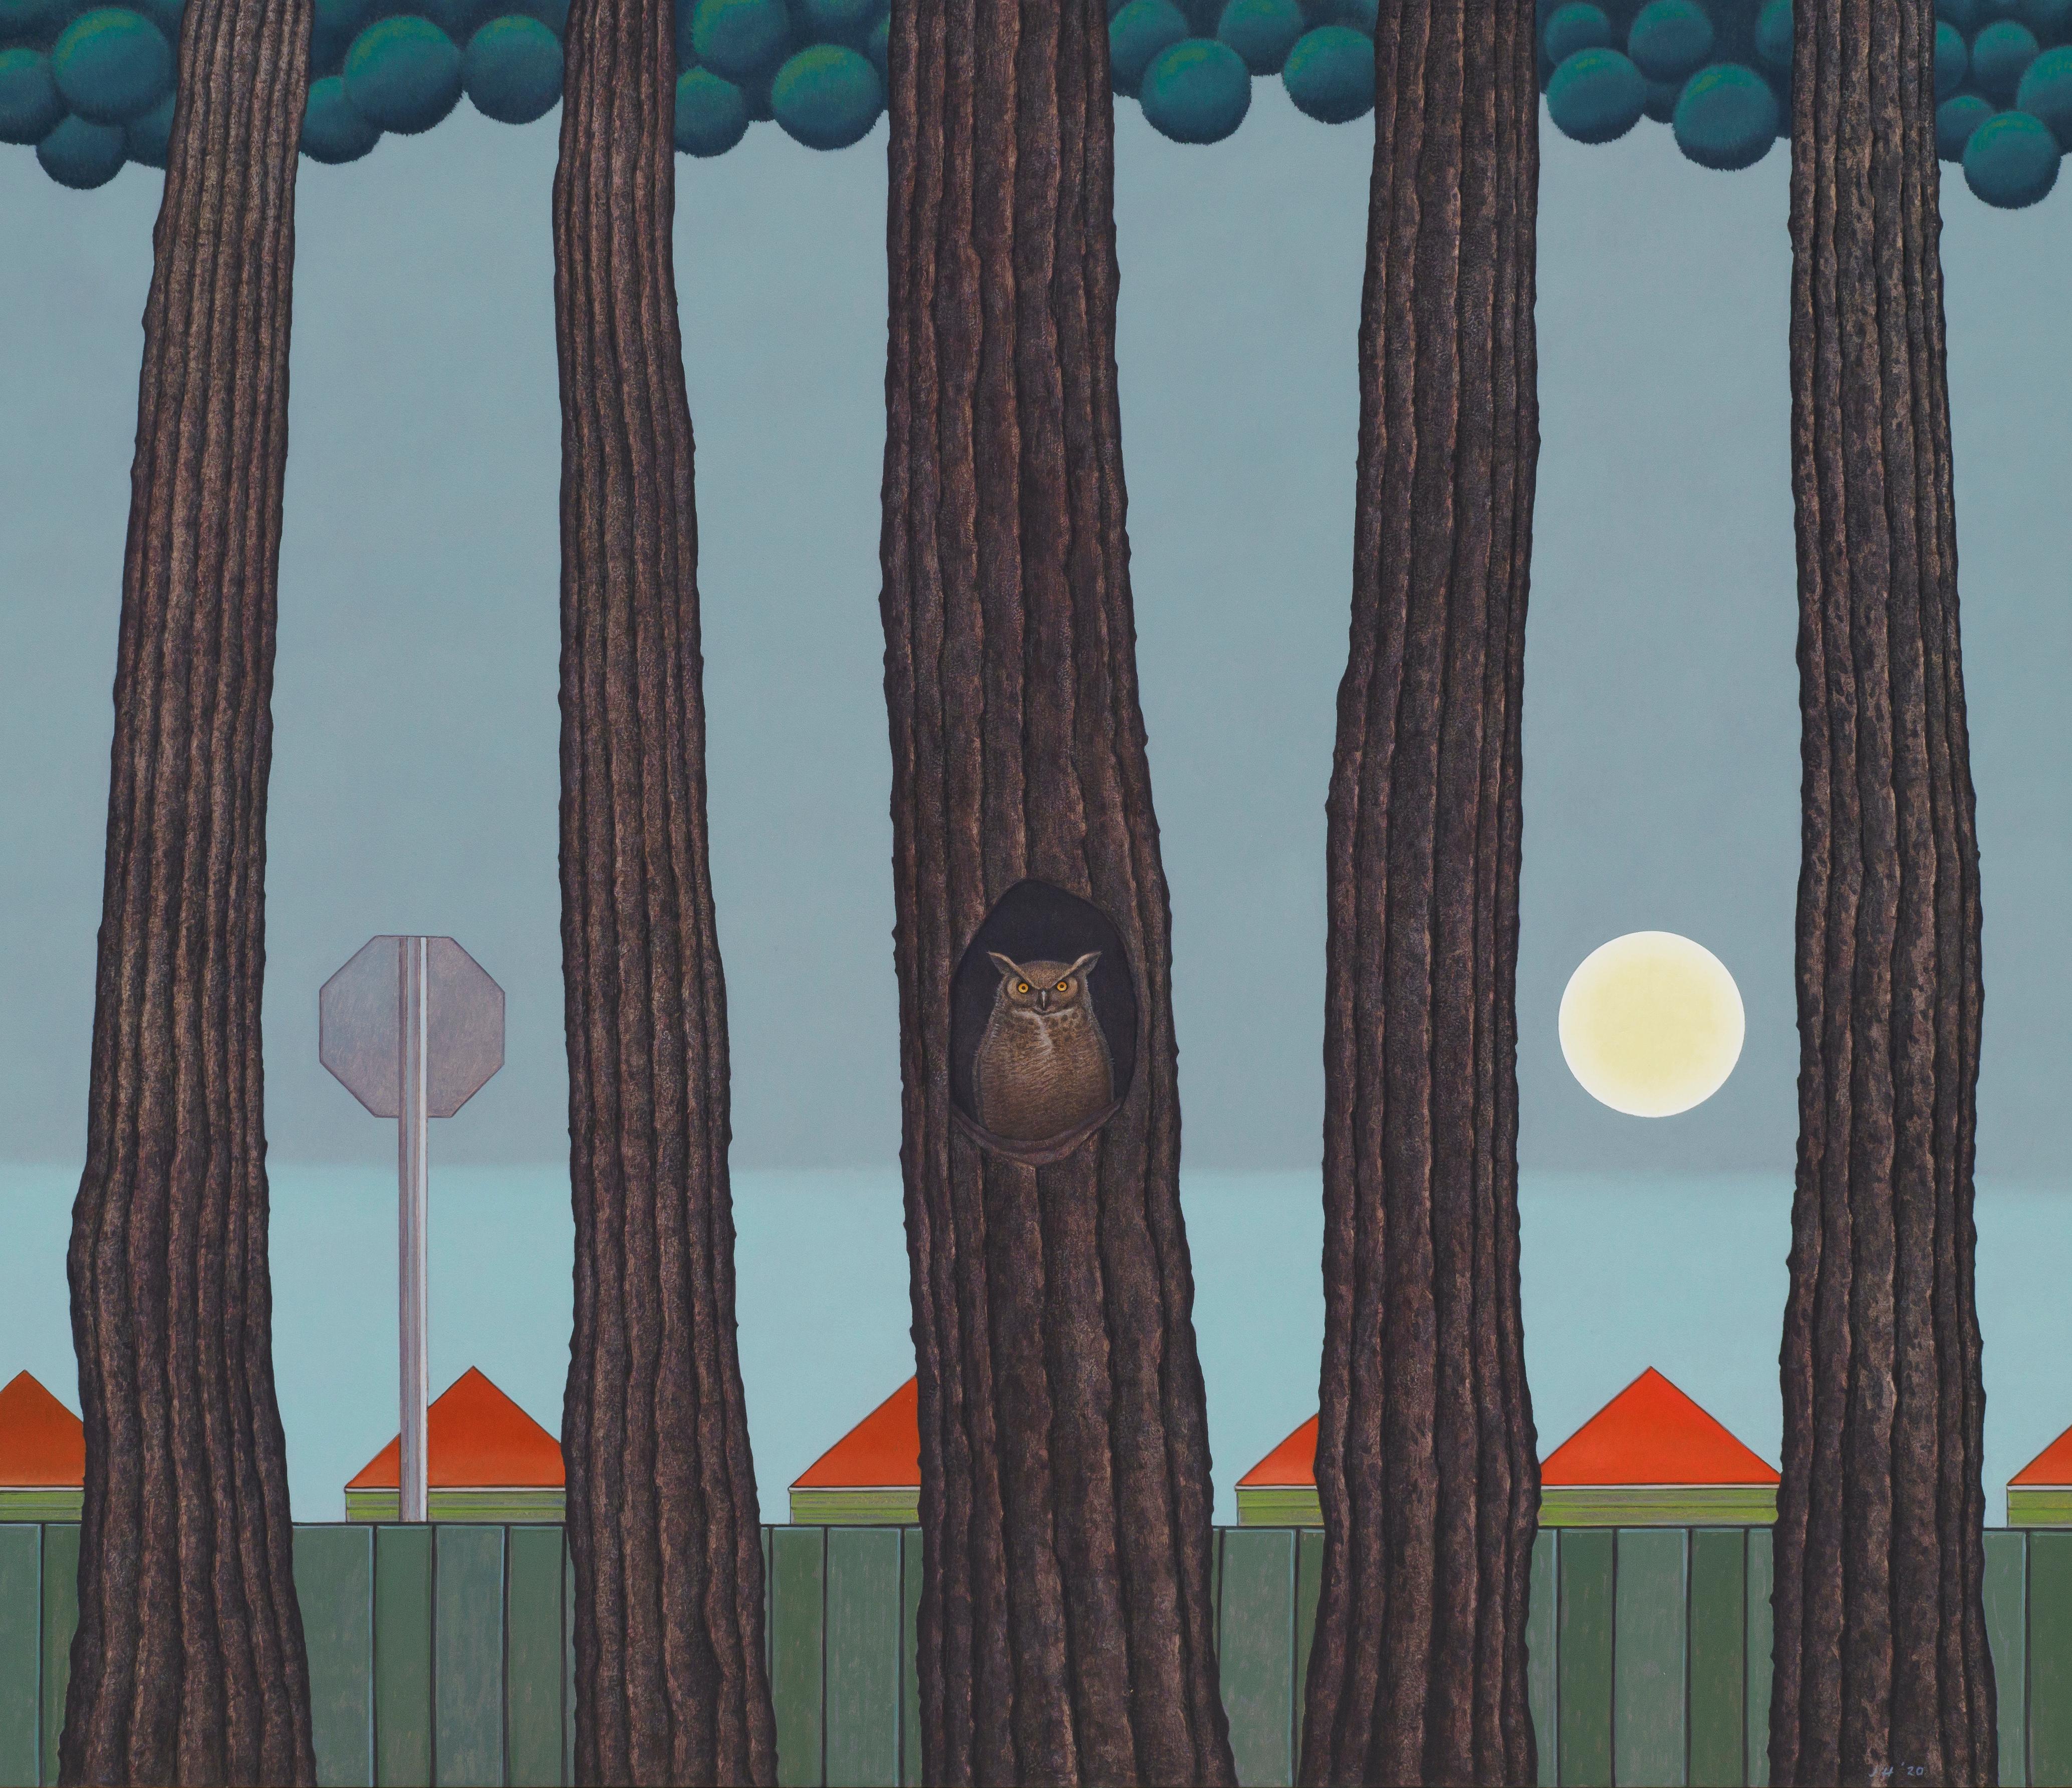 Rising -  Surreal Landscape with Row of Trees and Owl, Oil on Panel